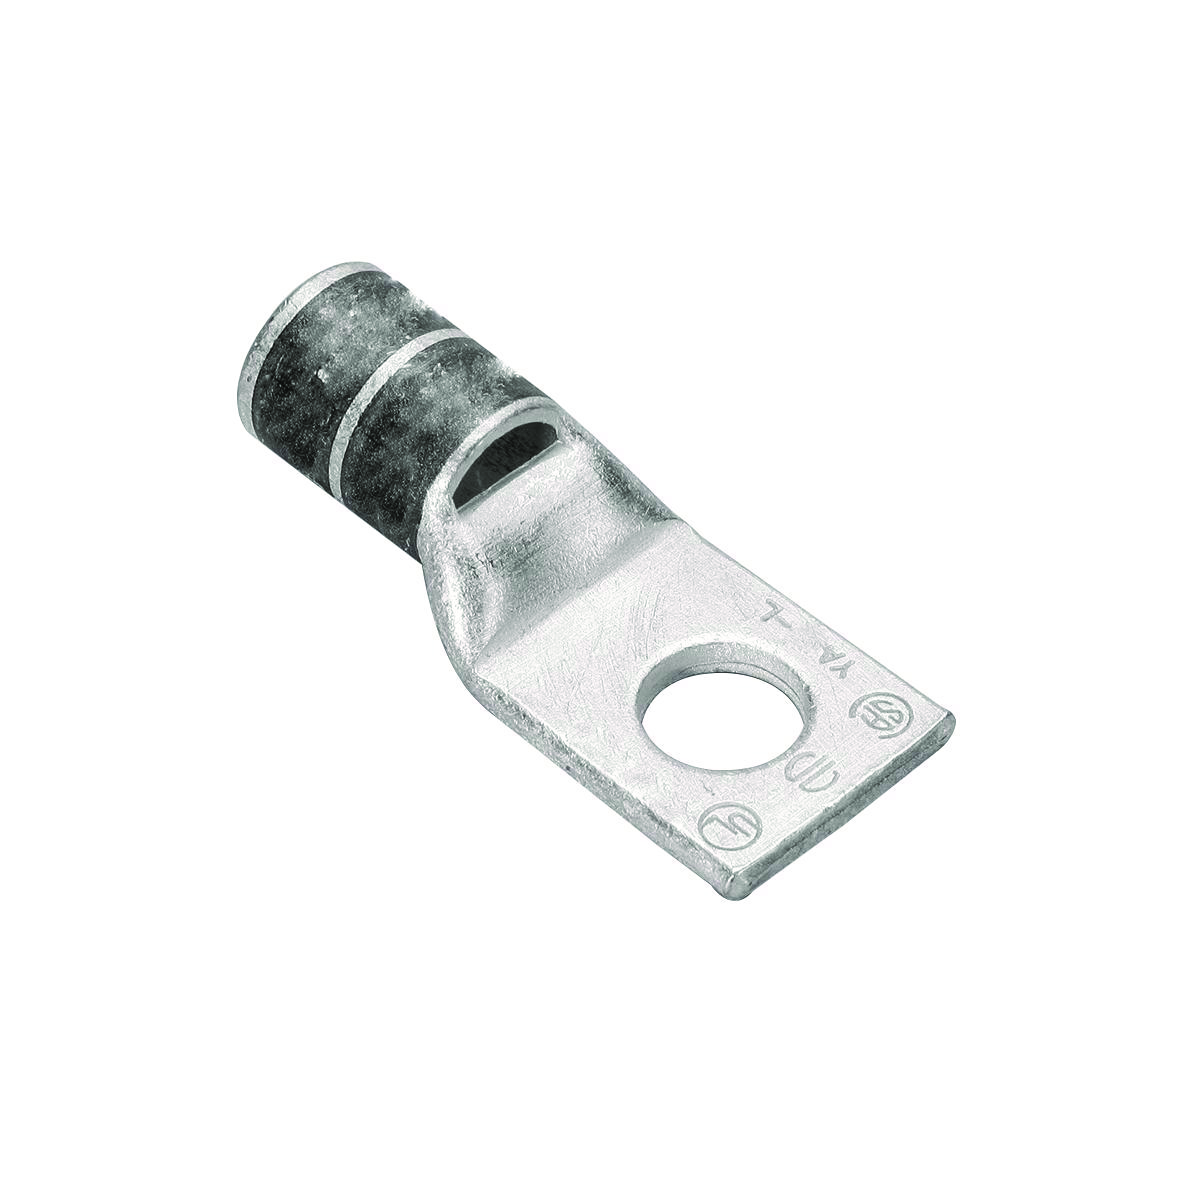 Standard Barrel with Window 1/4 Stud Hole Panduit LCA1-14-E Tin-Plated Copper Compression Connector Lug #1 AWG Wire One-Hole 